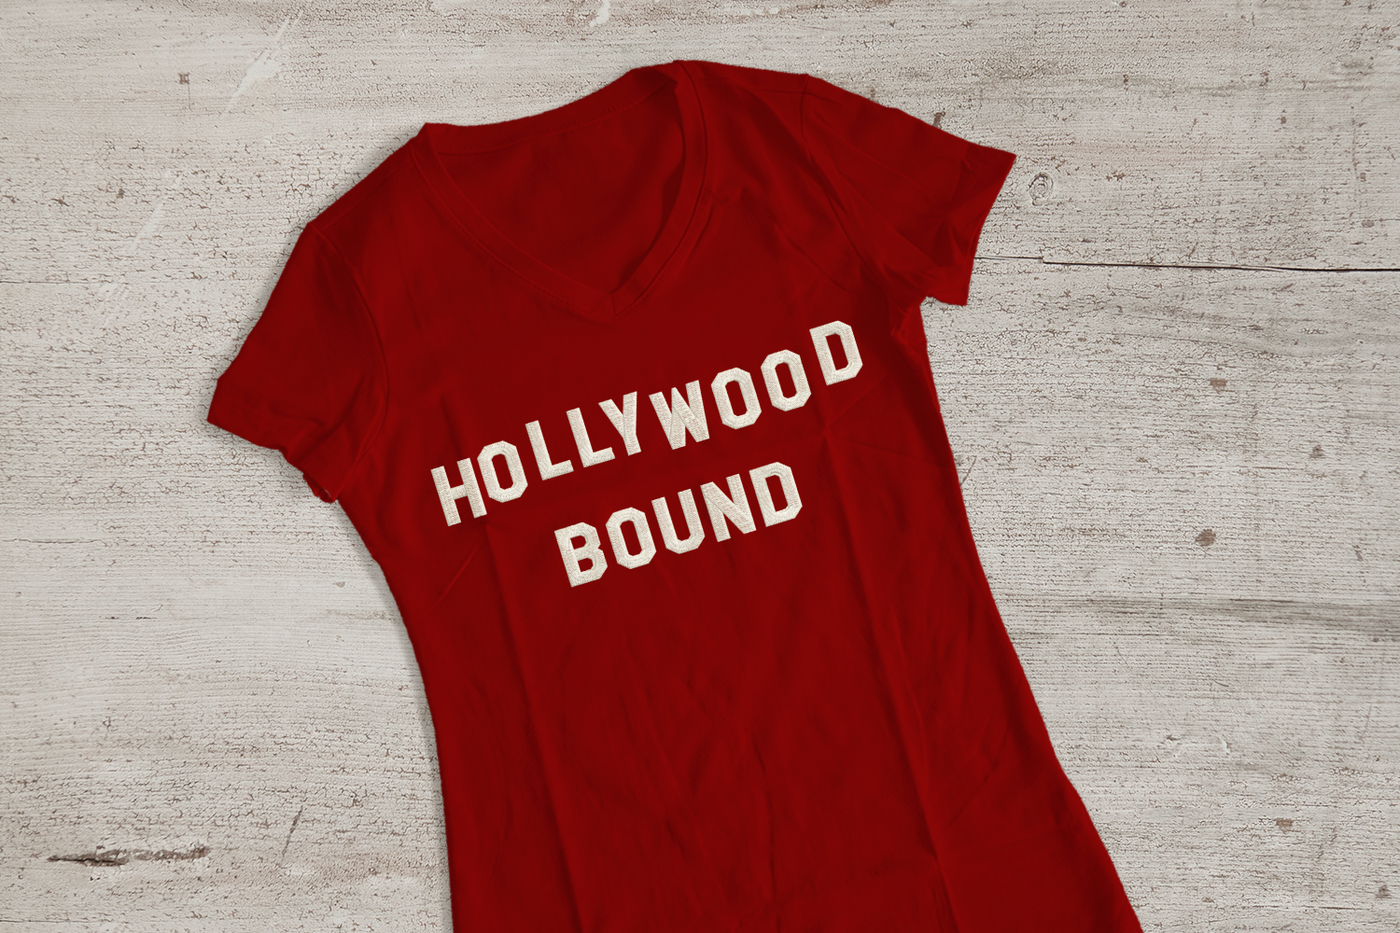 Tee embroidered with the words "Hollywood bound"